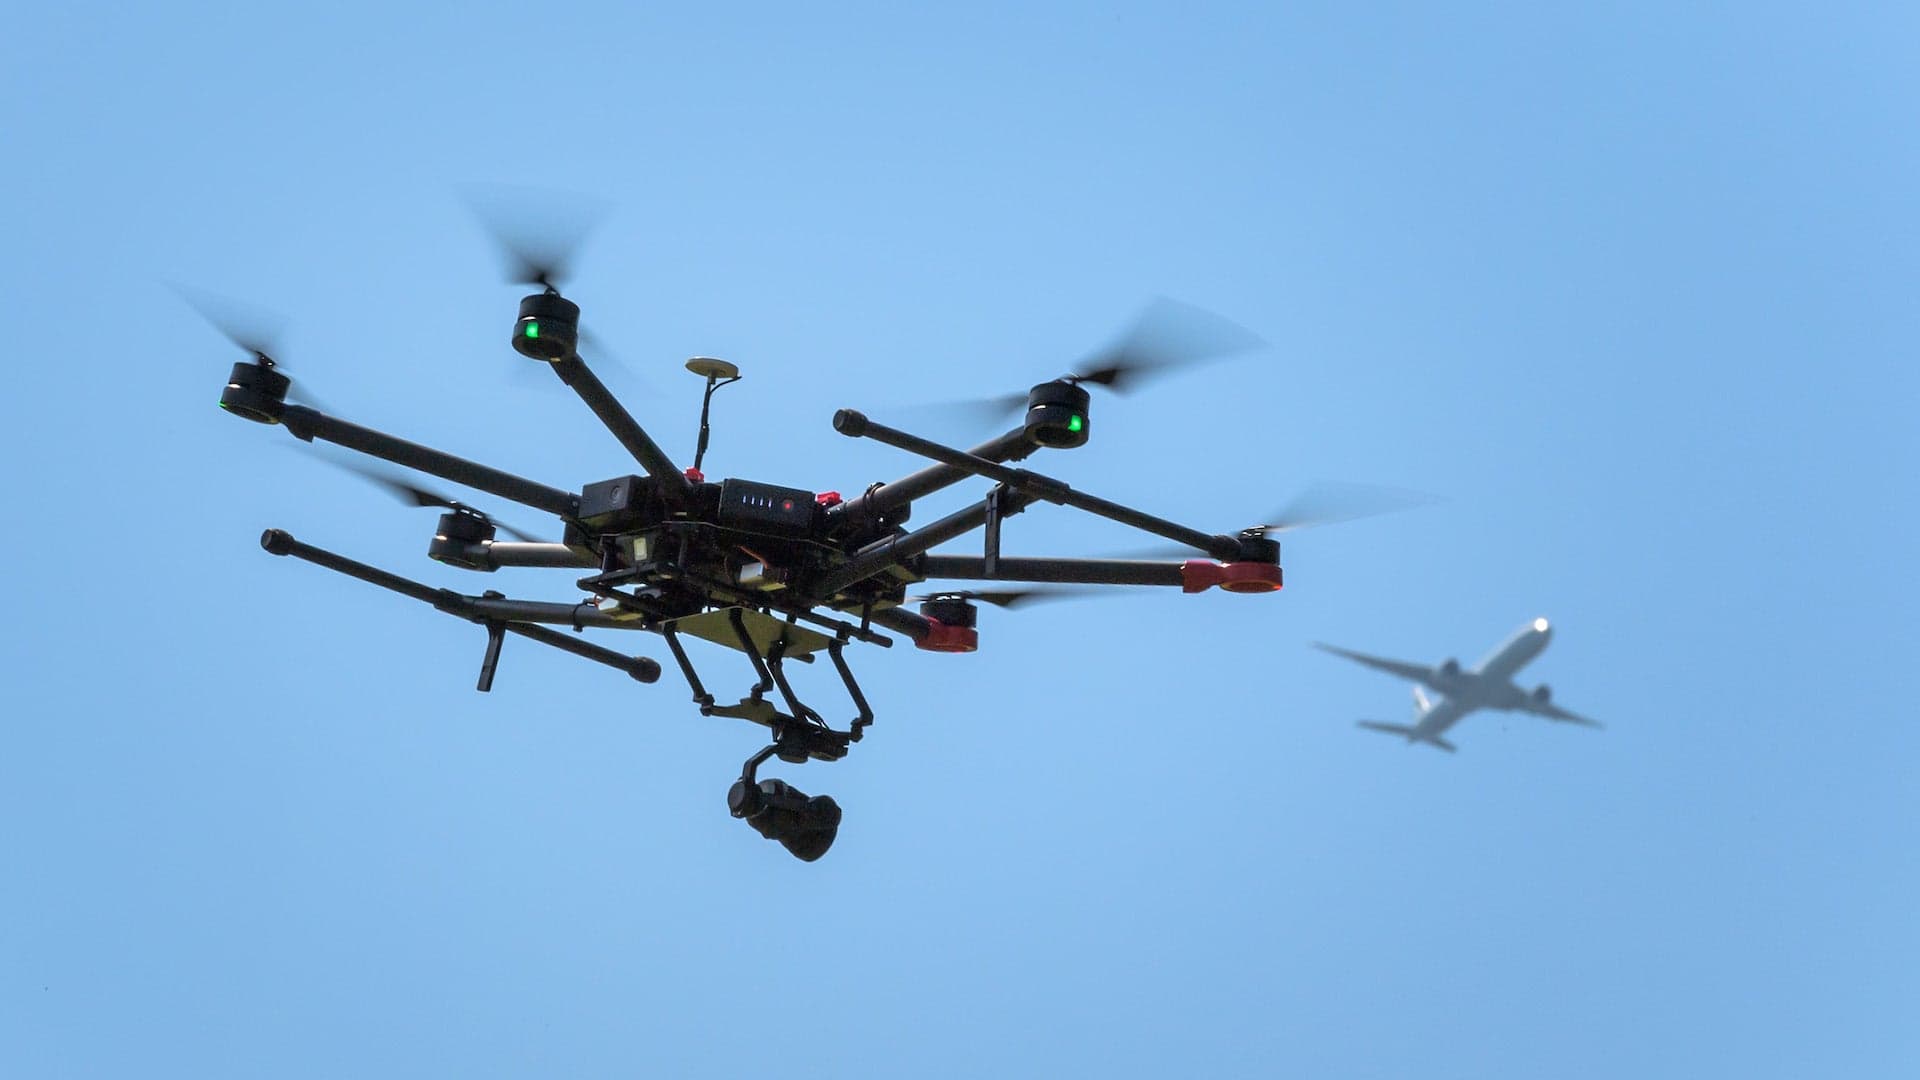 Commercial Drone Alliance to Meet With House of Representatives’ Aviation Subcommittee